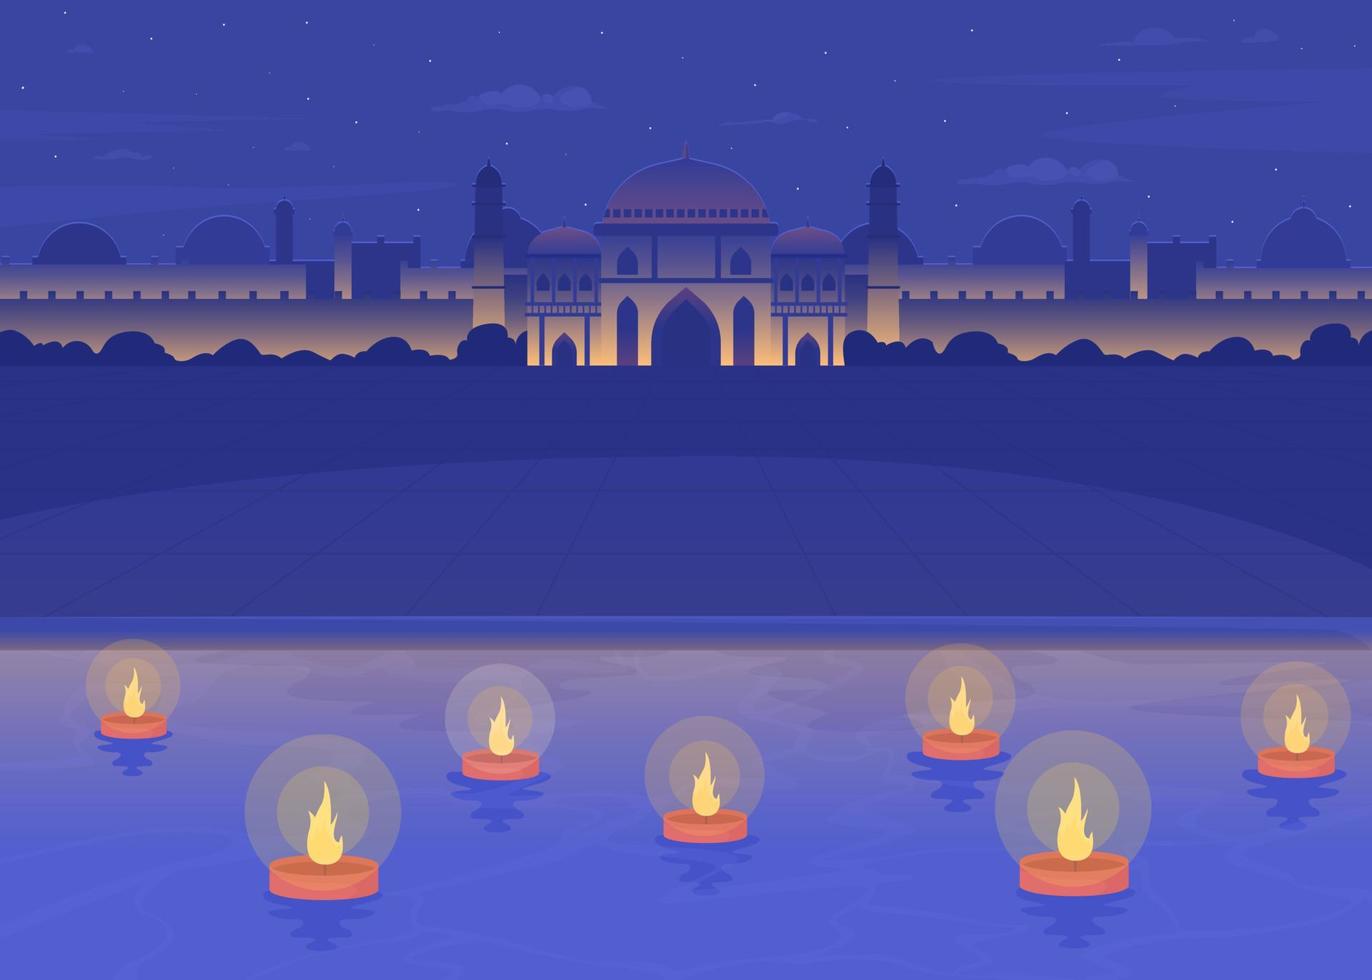 Diwali diyas floating in Ganges river flat color vector illustration. Burning candles in twilight. Indian temple architecture. Fully editable 2D simple cartoon landscape with Jal Mahal on background